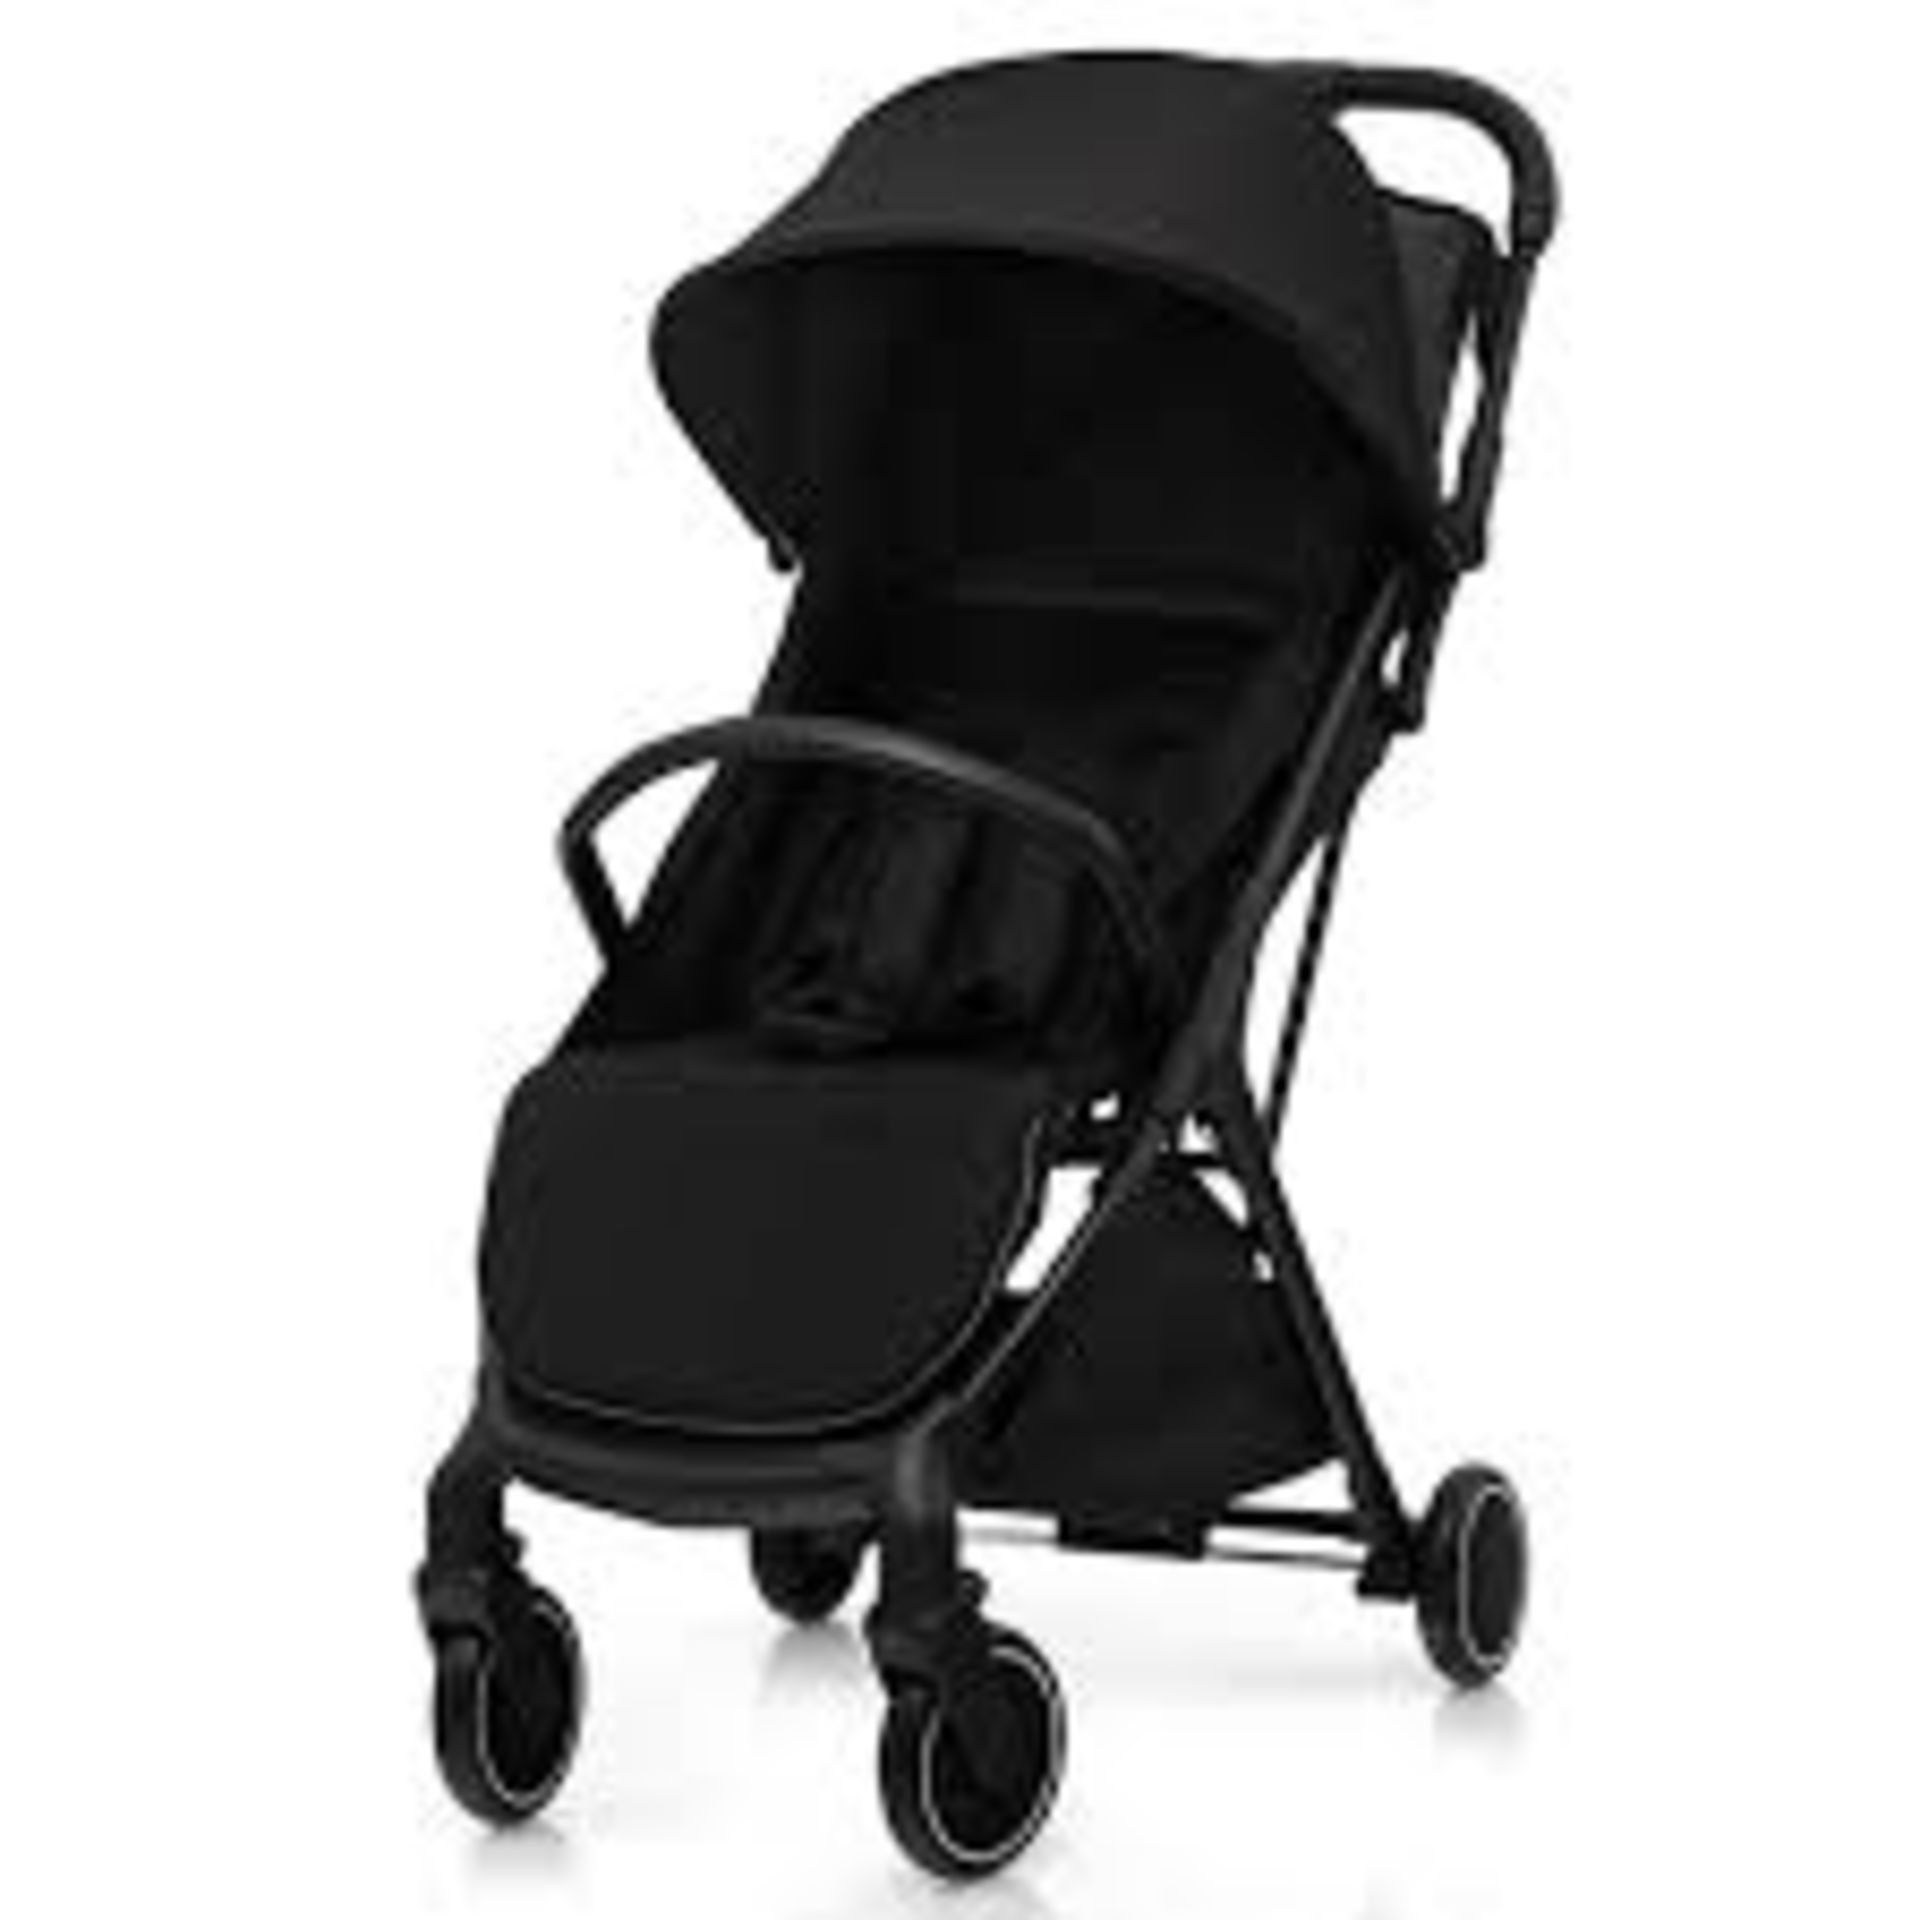 Lightweight Baby Stroller with Detachable Seat Cover-Black. - R14.13.